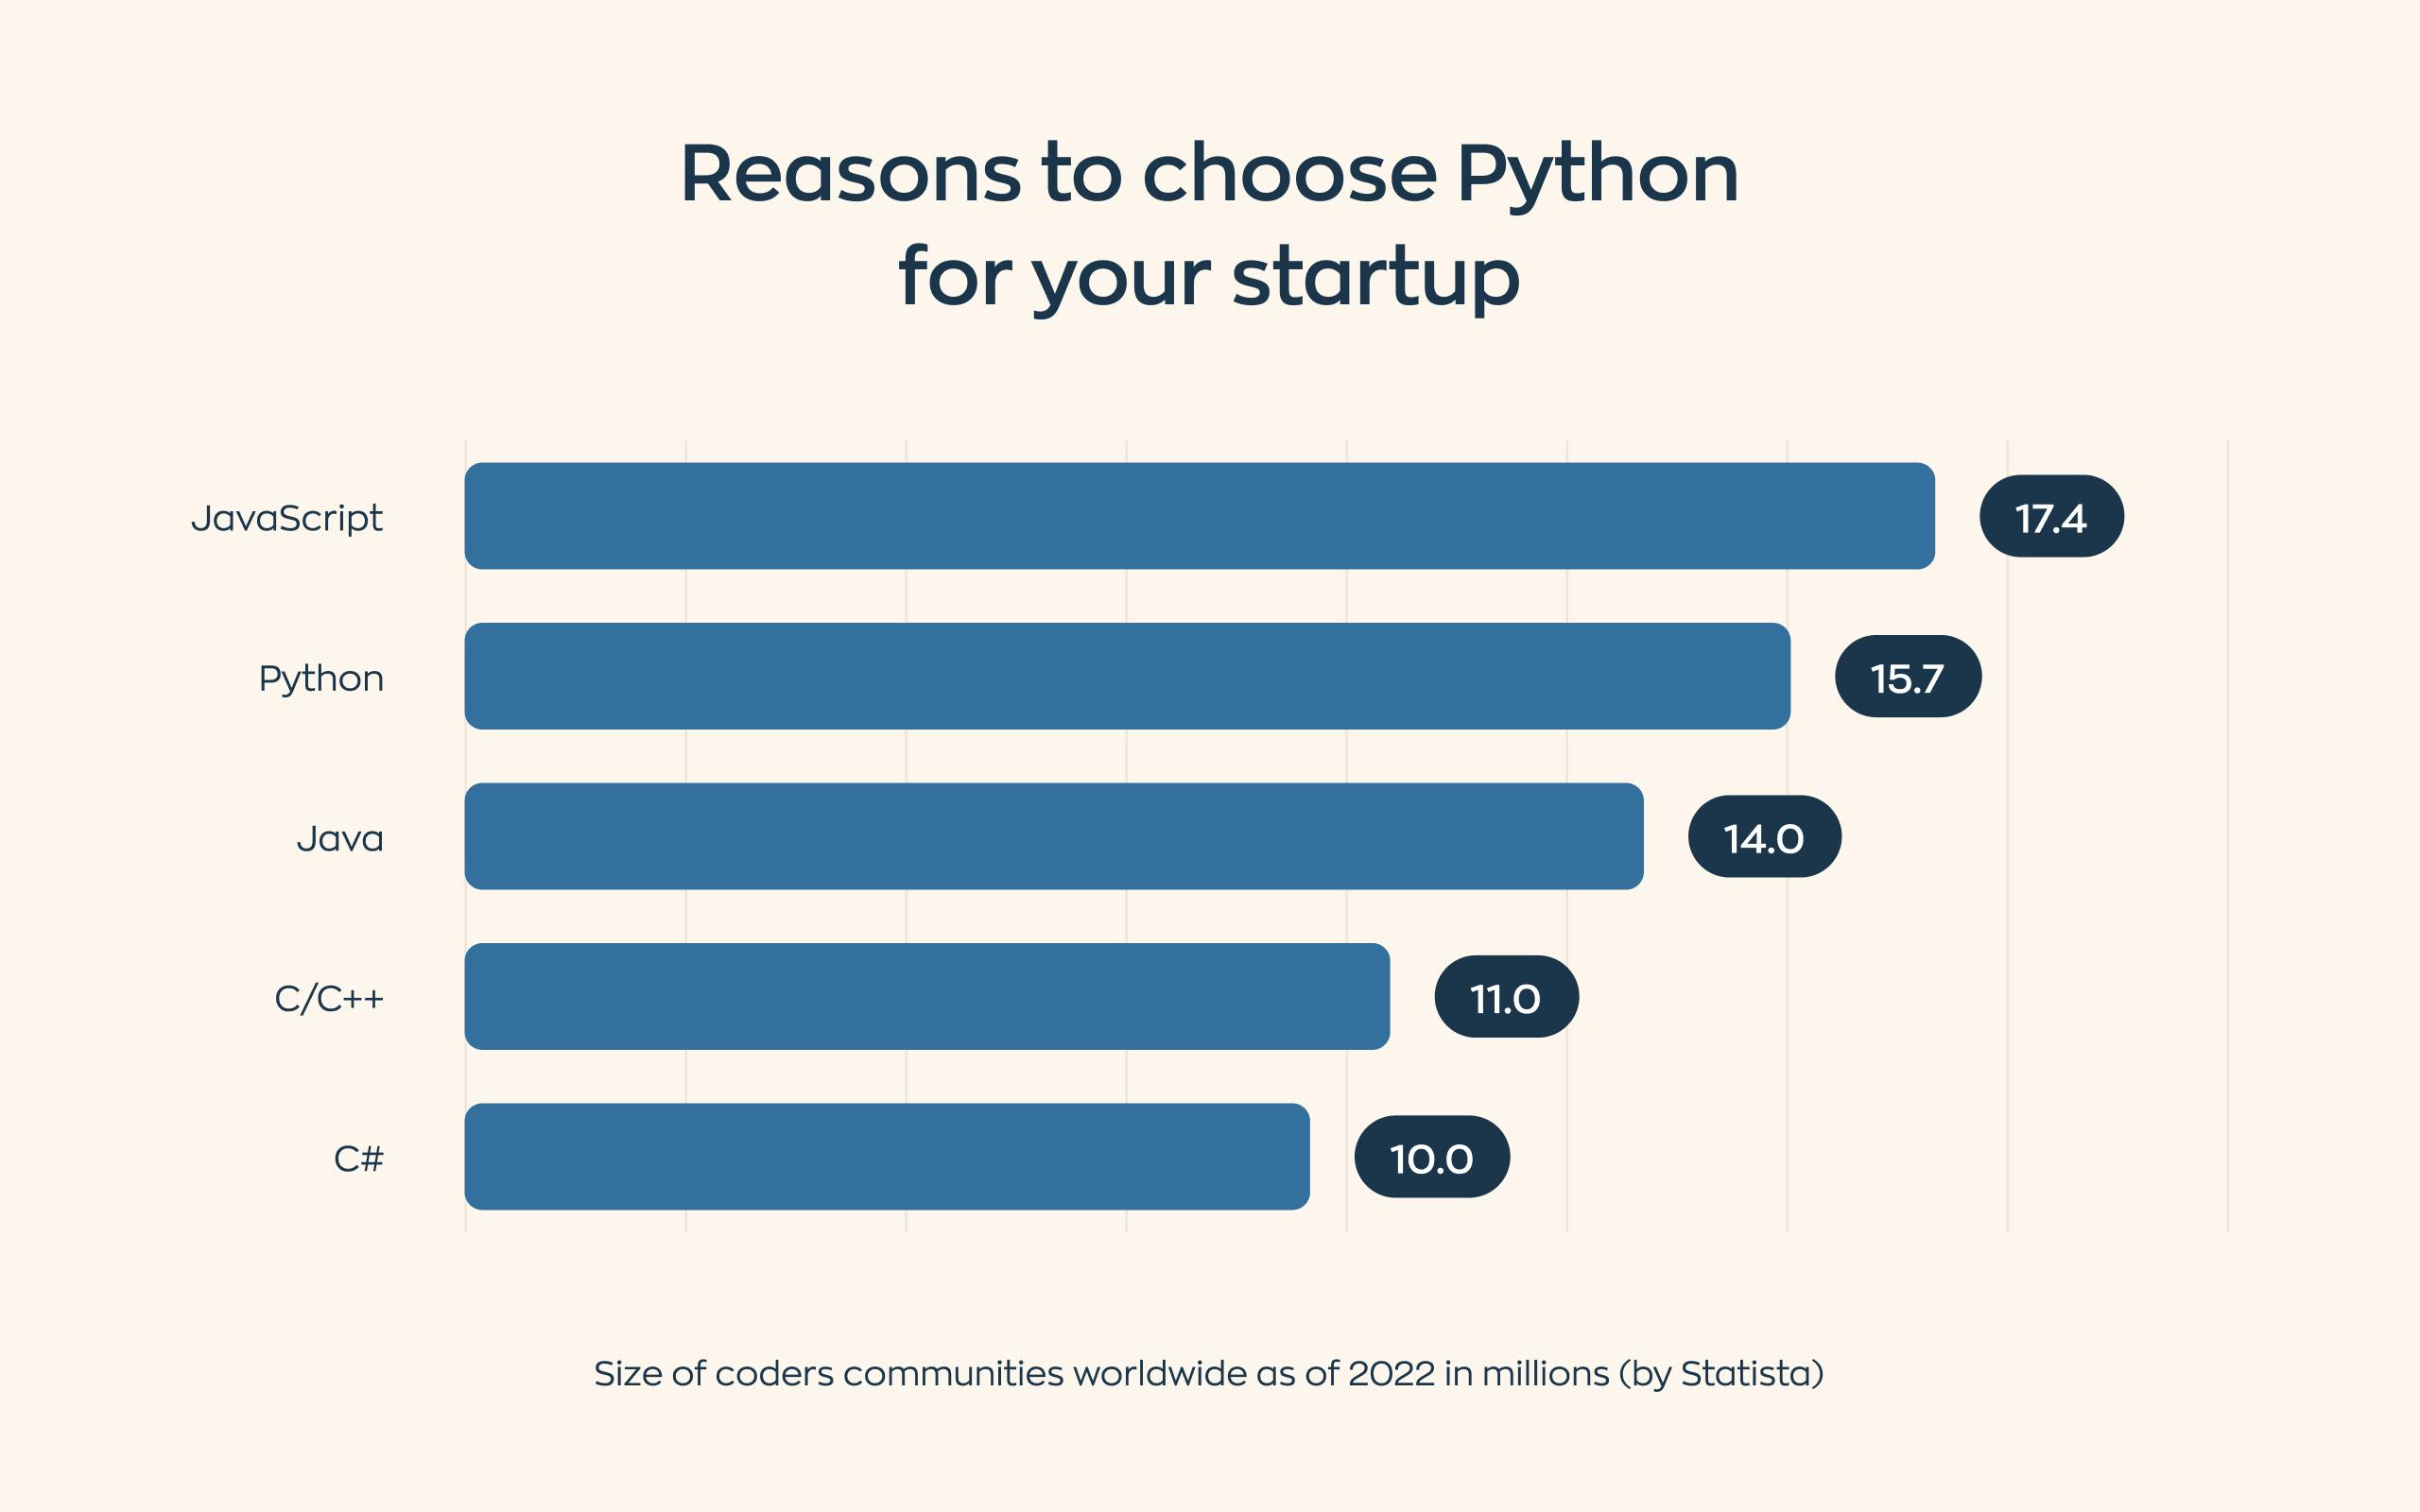 Statistic by Statista displaying the size of coders communities worldwide as of 2022 in millions. Python takes the second place with 15.7 millions, Javascript is on the first place with 17.4, Java is on the third with 14.0.